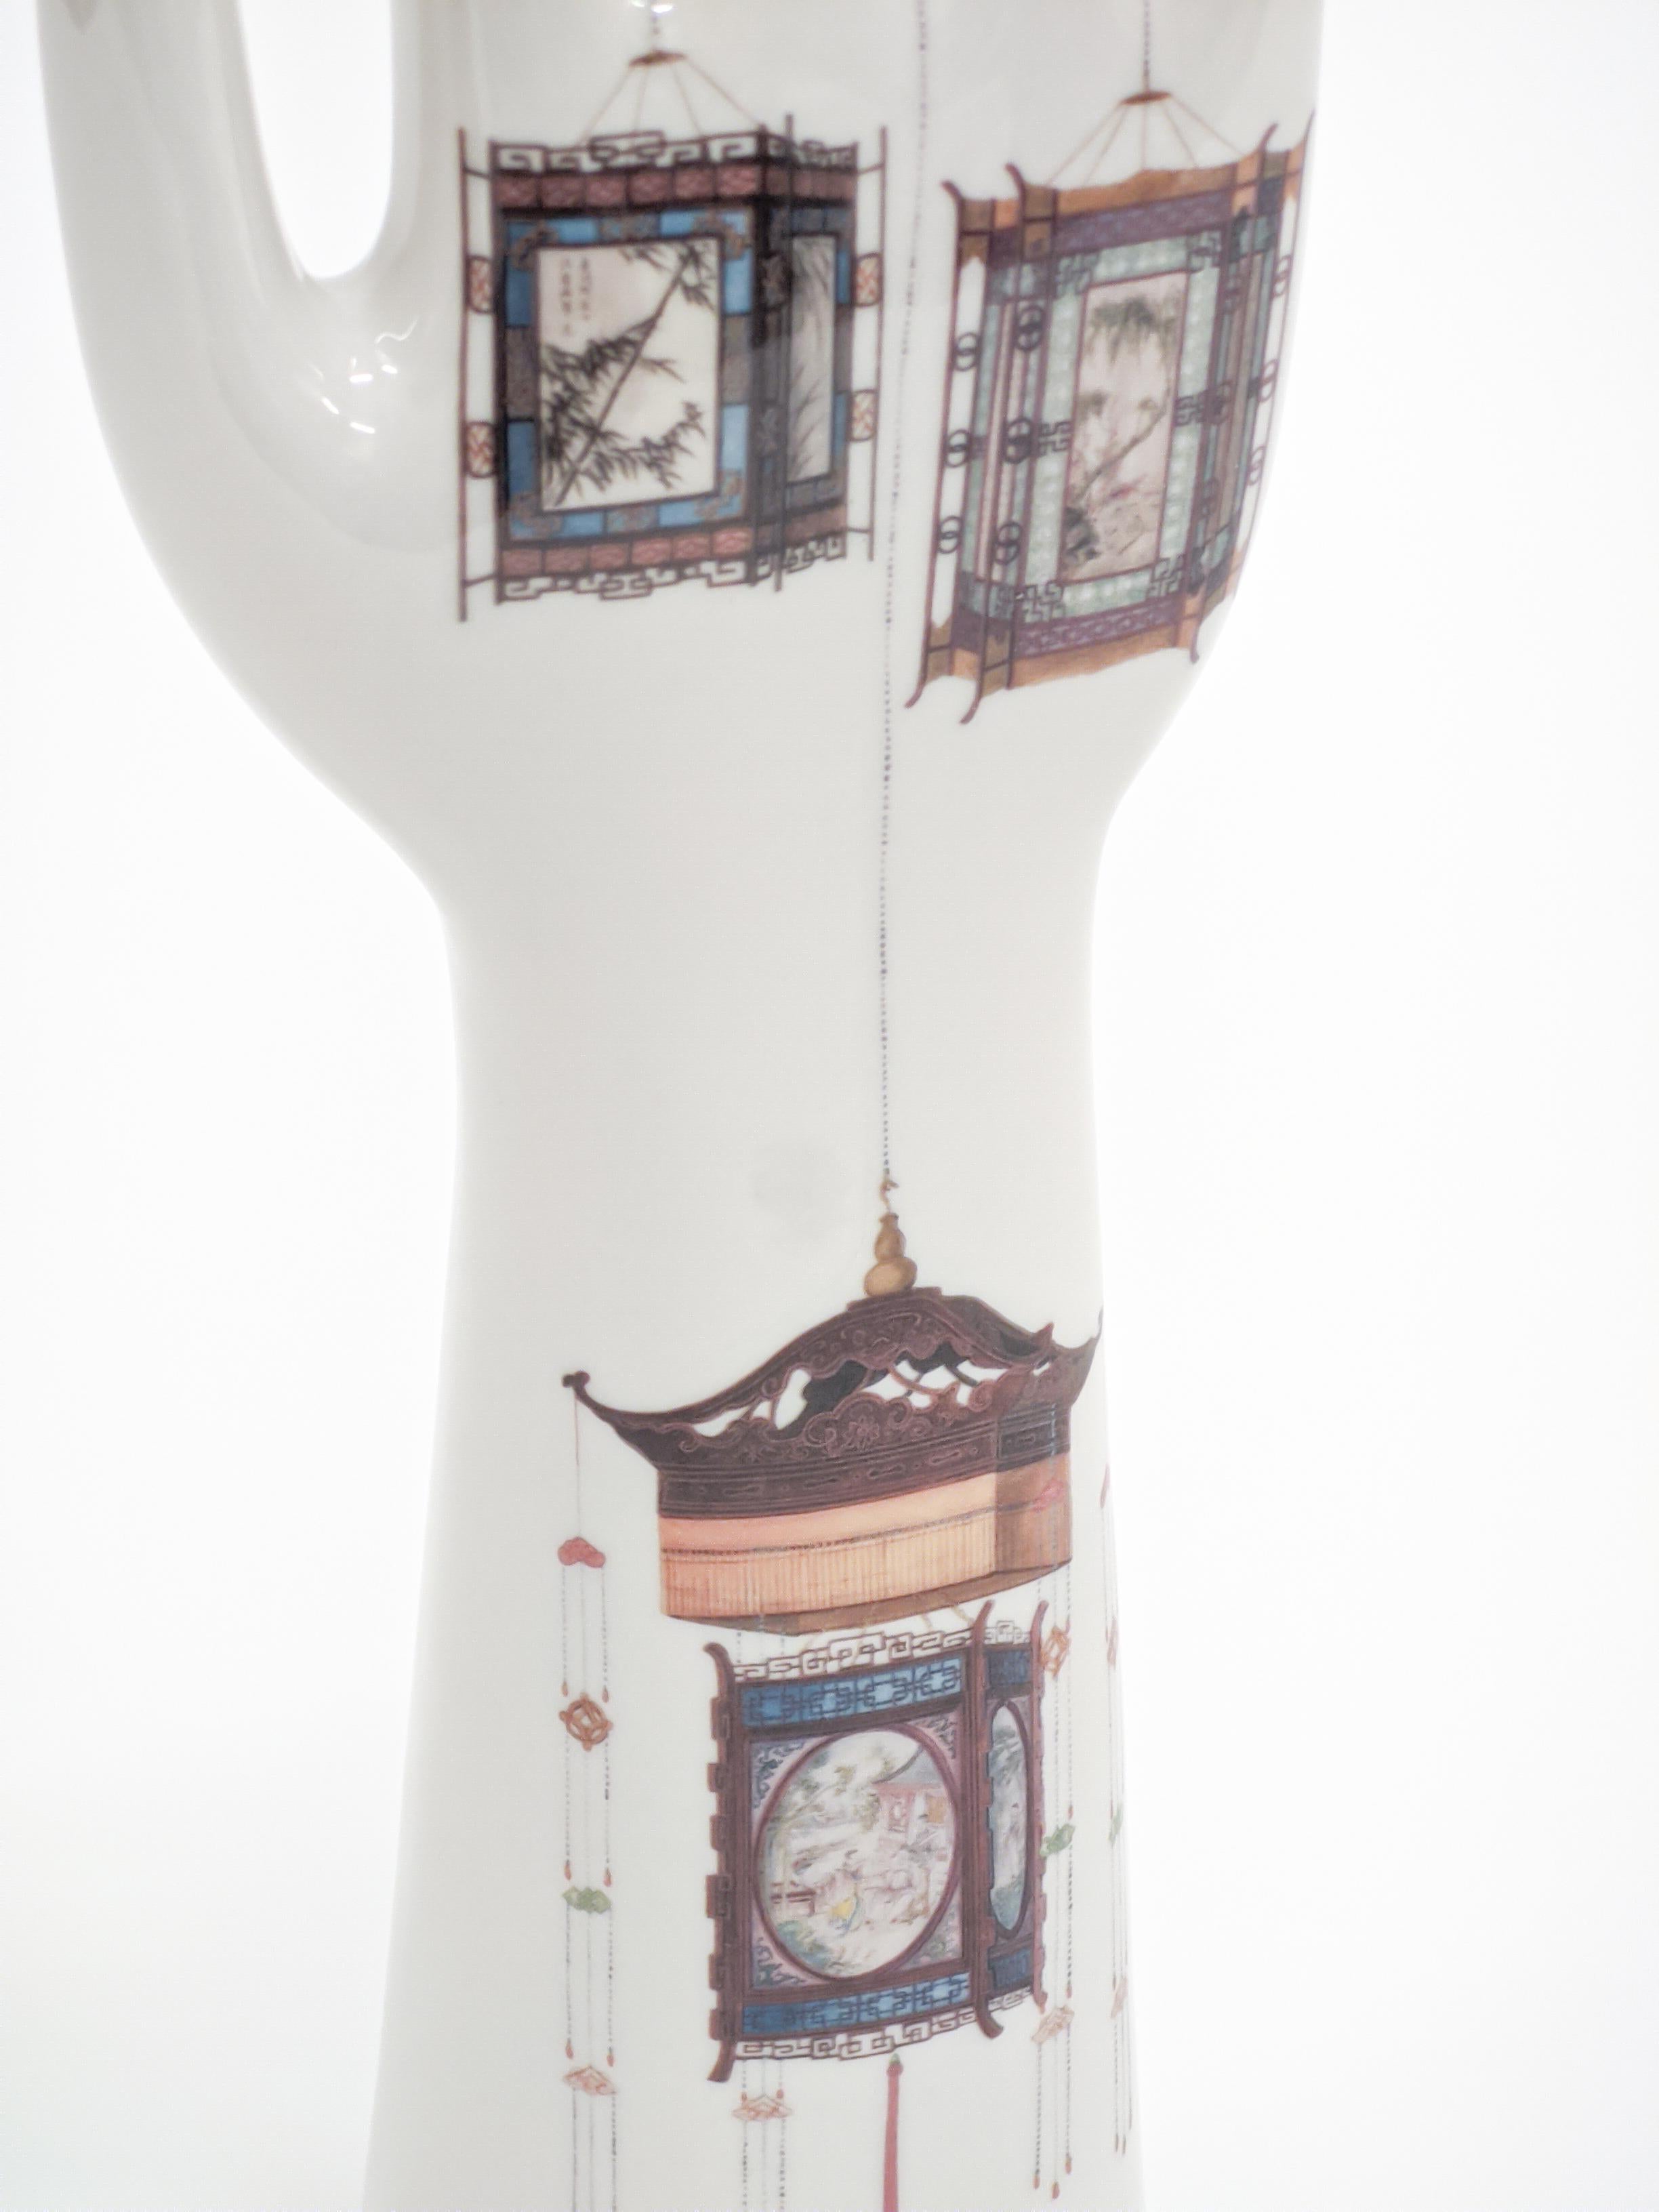 Italian Anatomica, Porcelain Hand with Chinese Lanterns Decoration by Vito Nesta For Sale